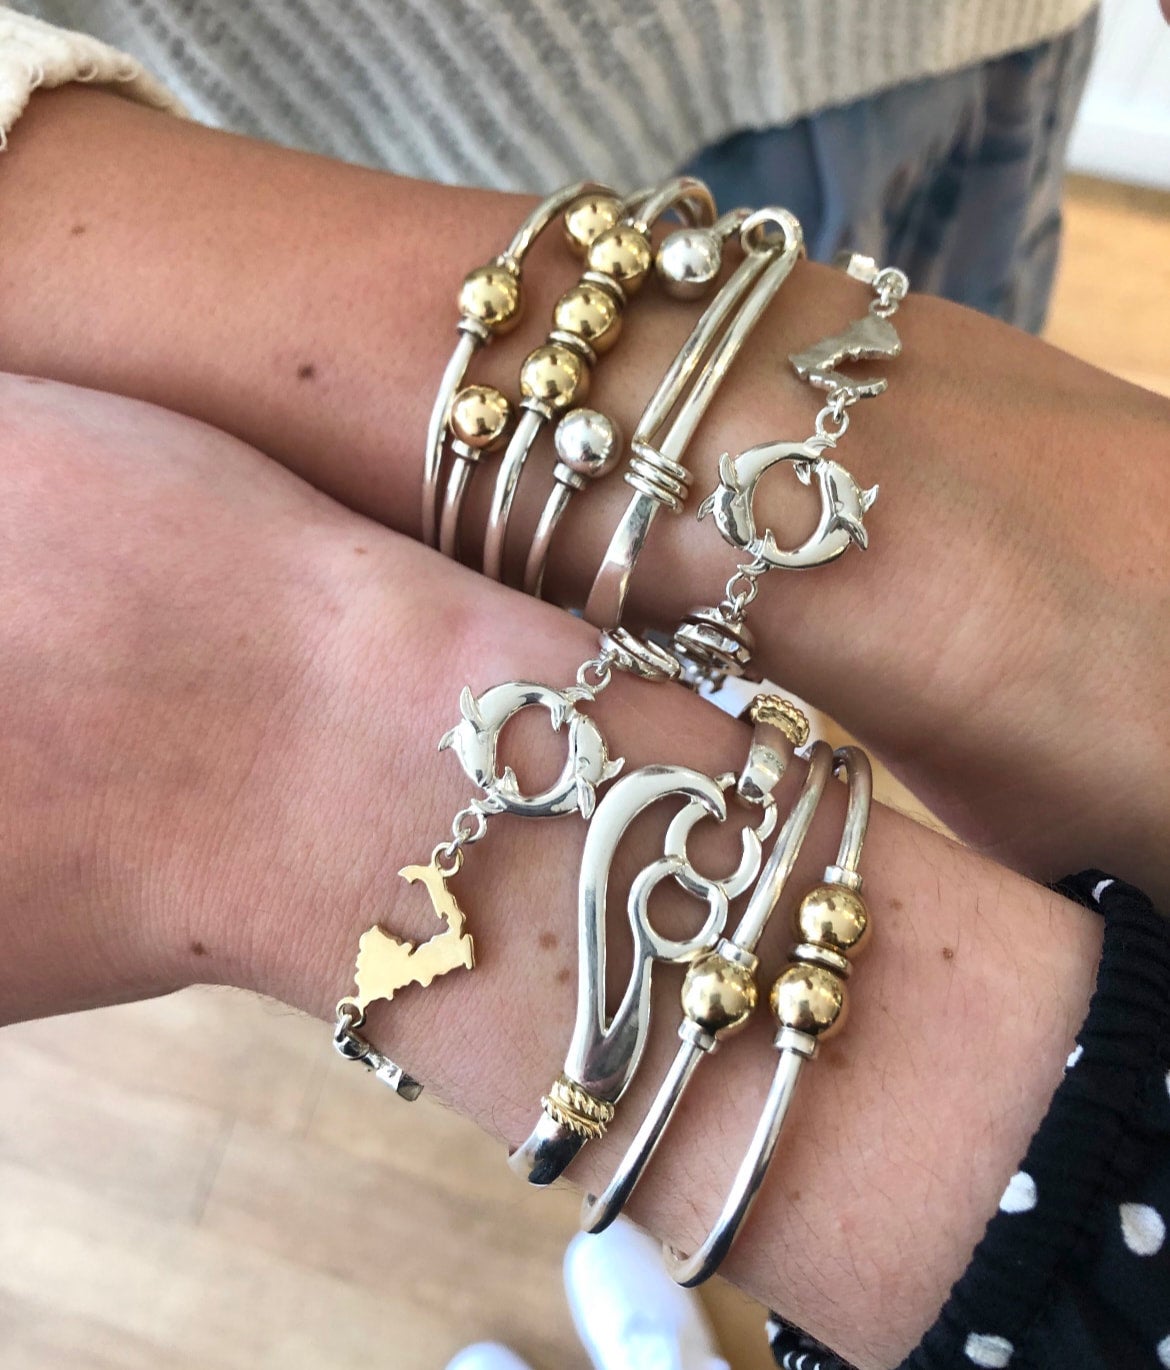 Everything You Need To Know About Cape Cod Bracelets - CapeCod.com